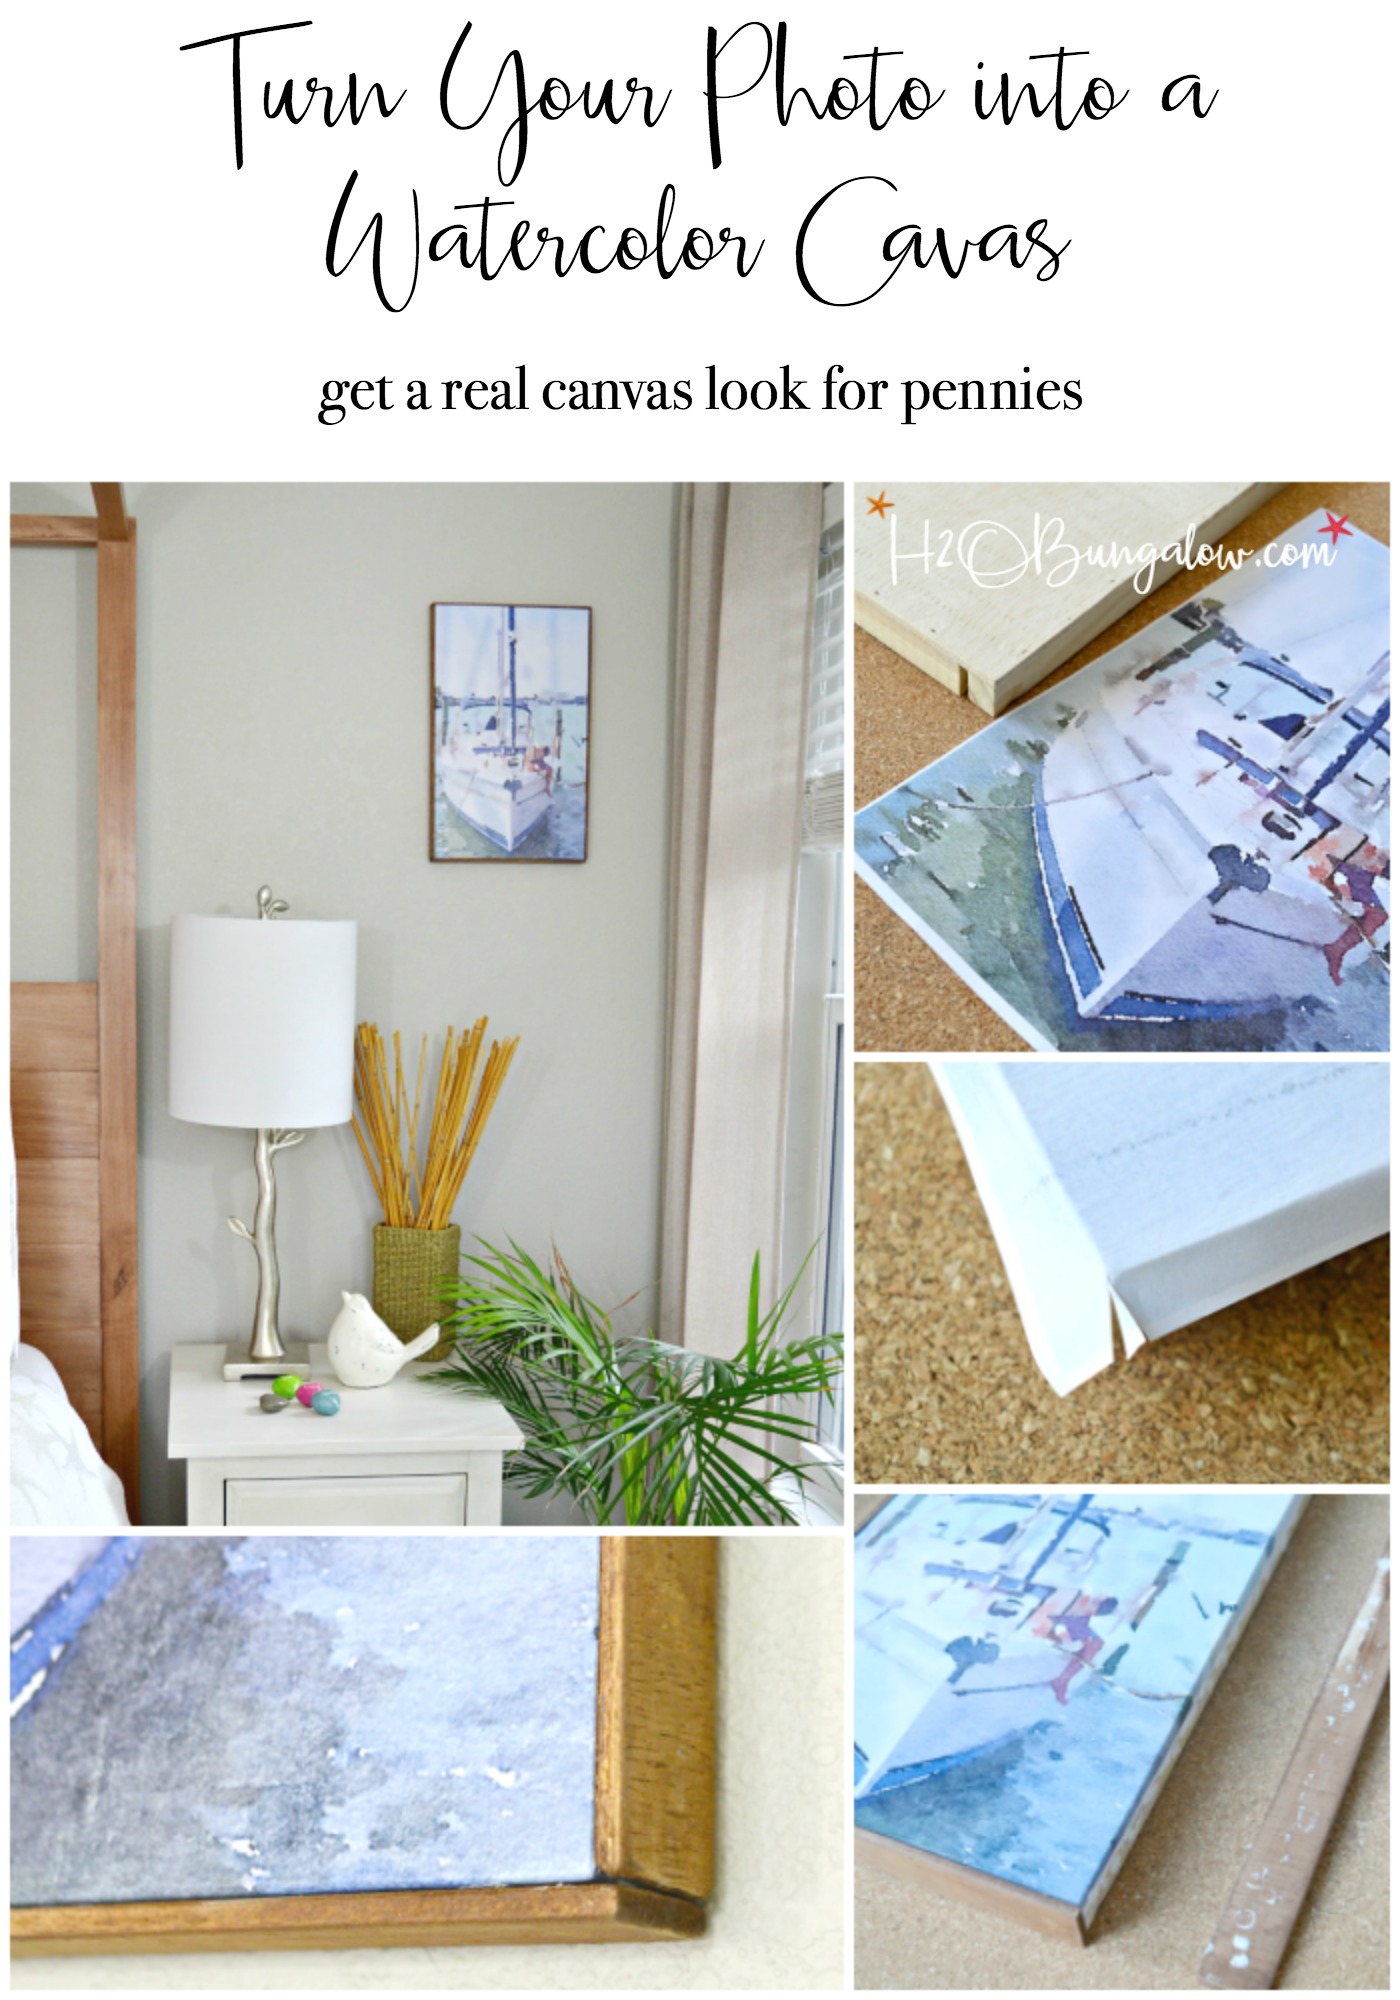 Easy DIY Photo Into Faux Canvas Print tutorial. Take any photo and make a faux canvas art for your home. Easy, inexpensive and looks great! 